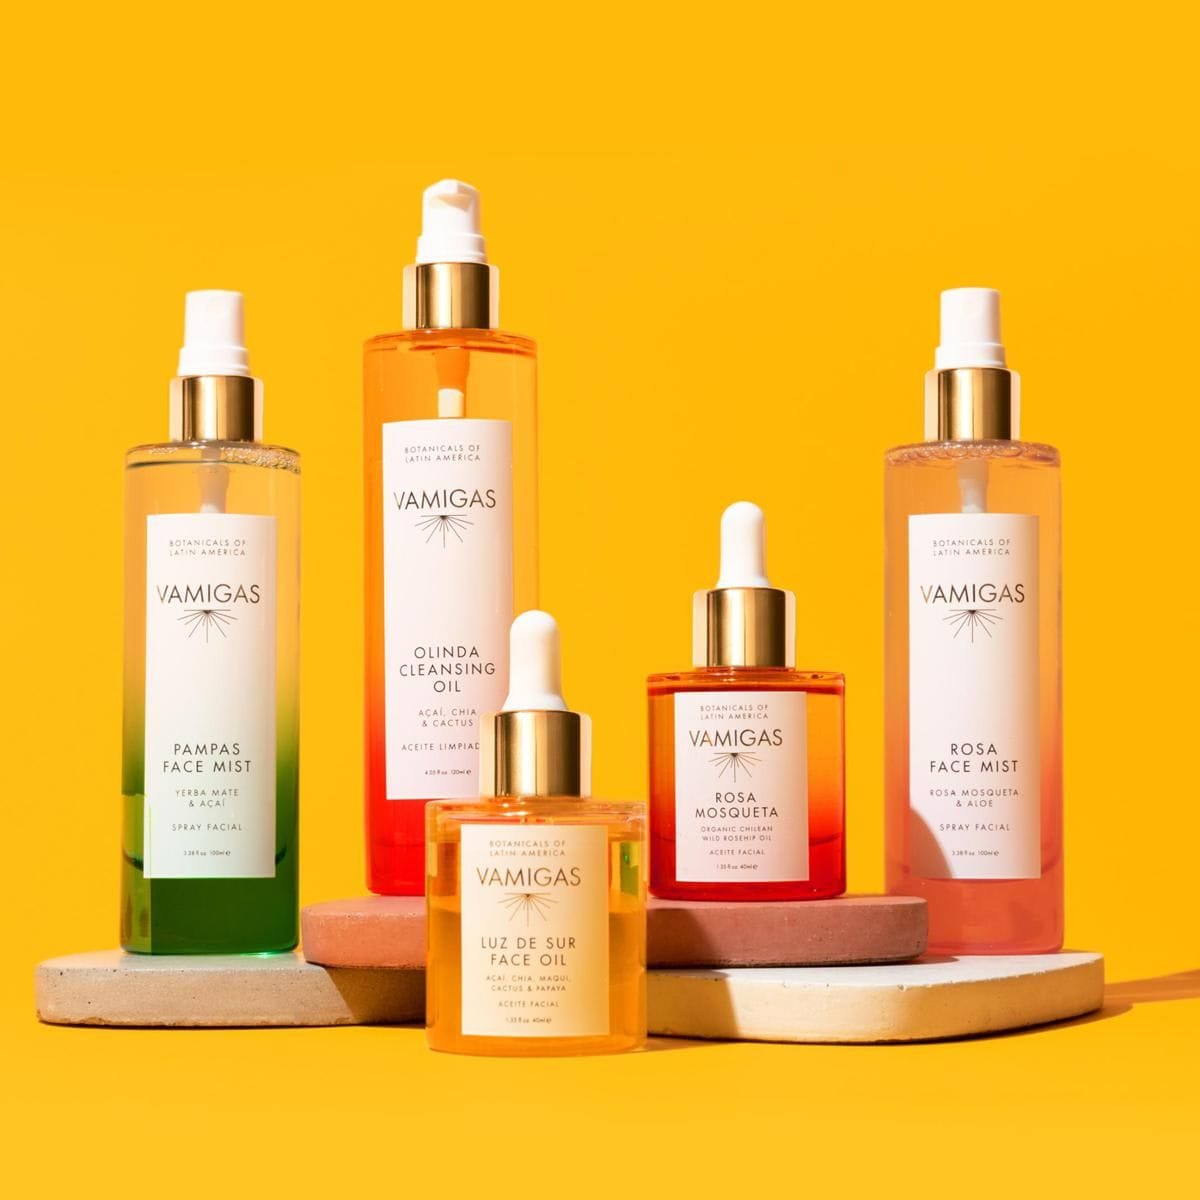 Vamigas skincare brand, now available at Target